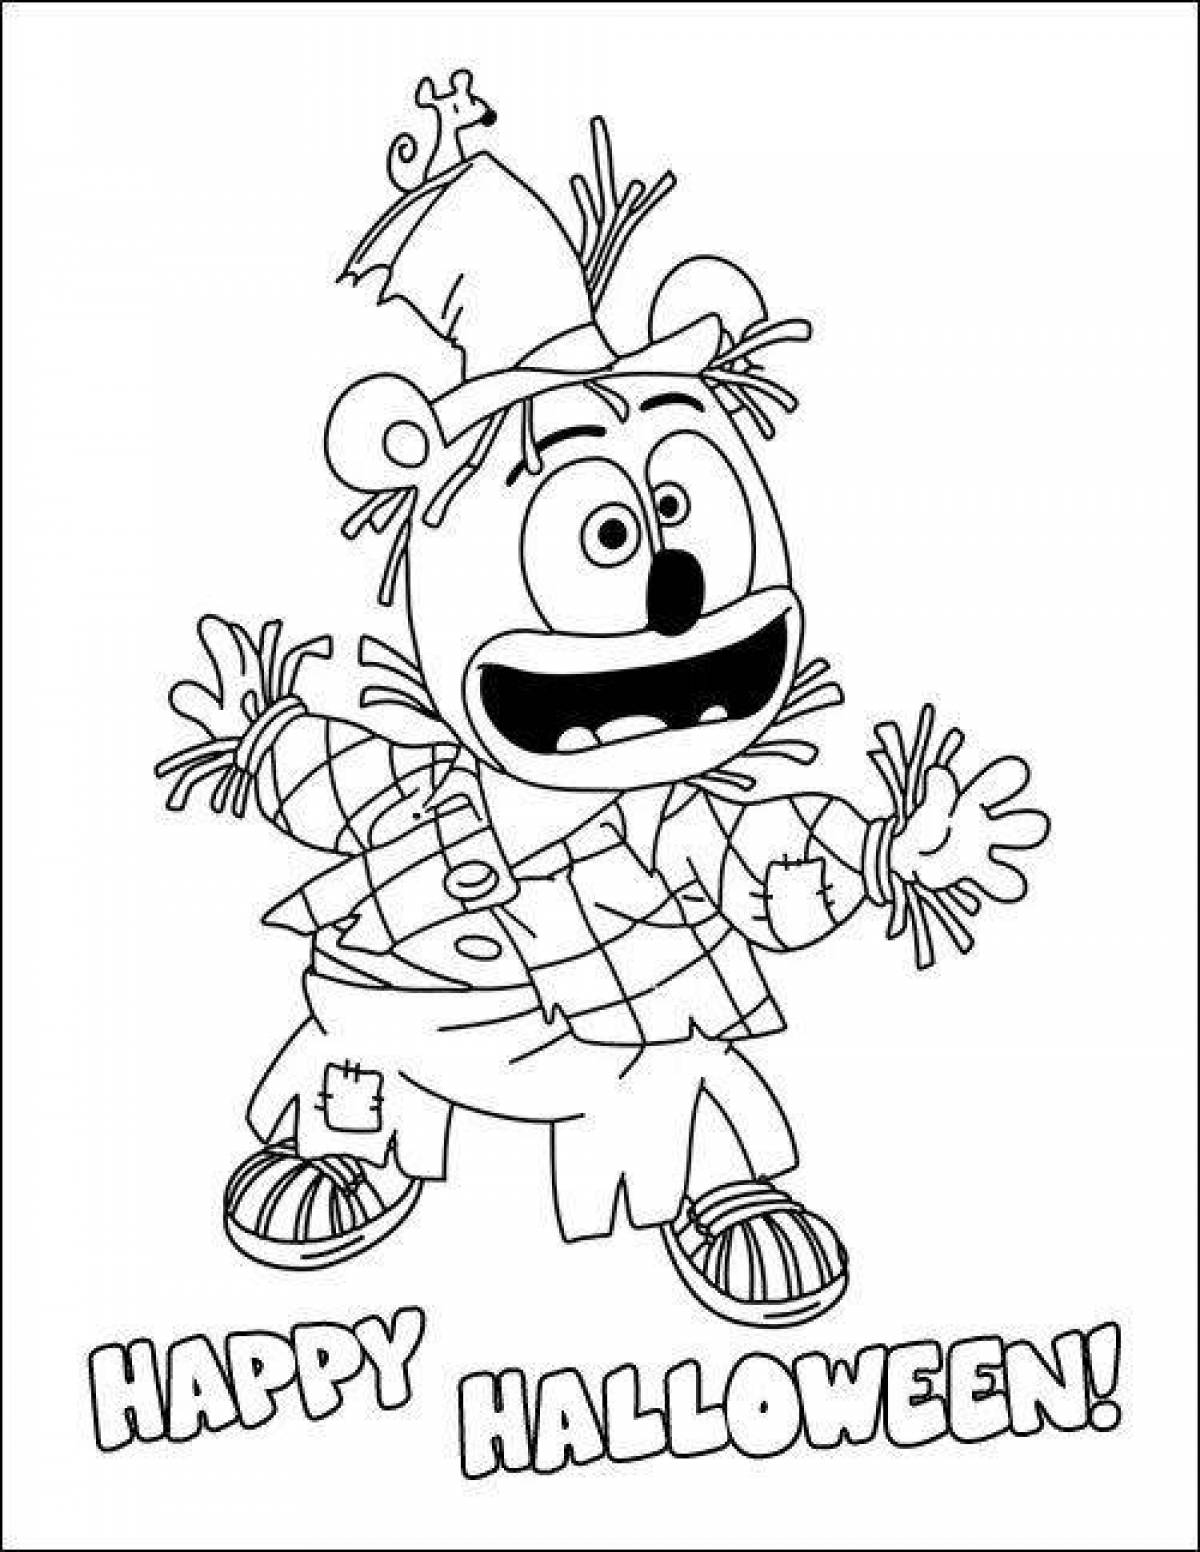 Adorable Humber Bear Coloring Page